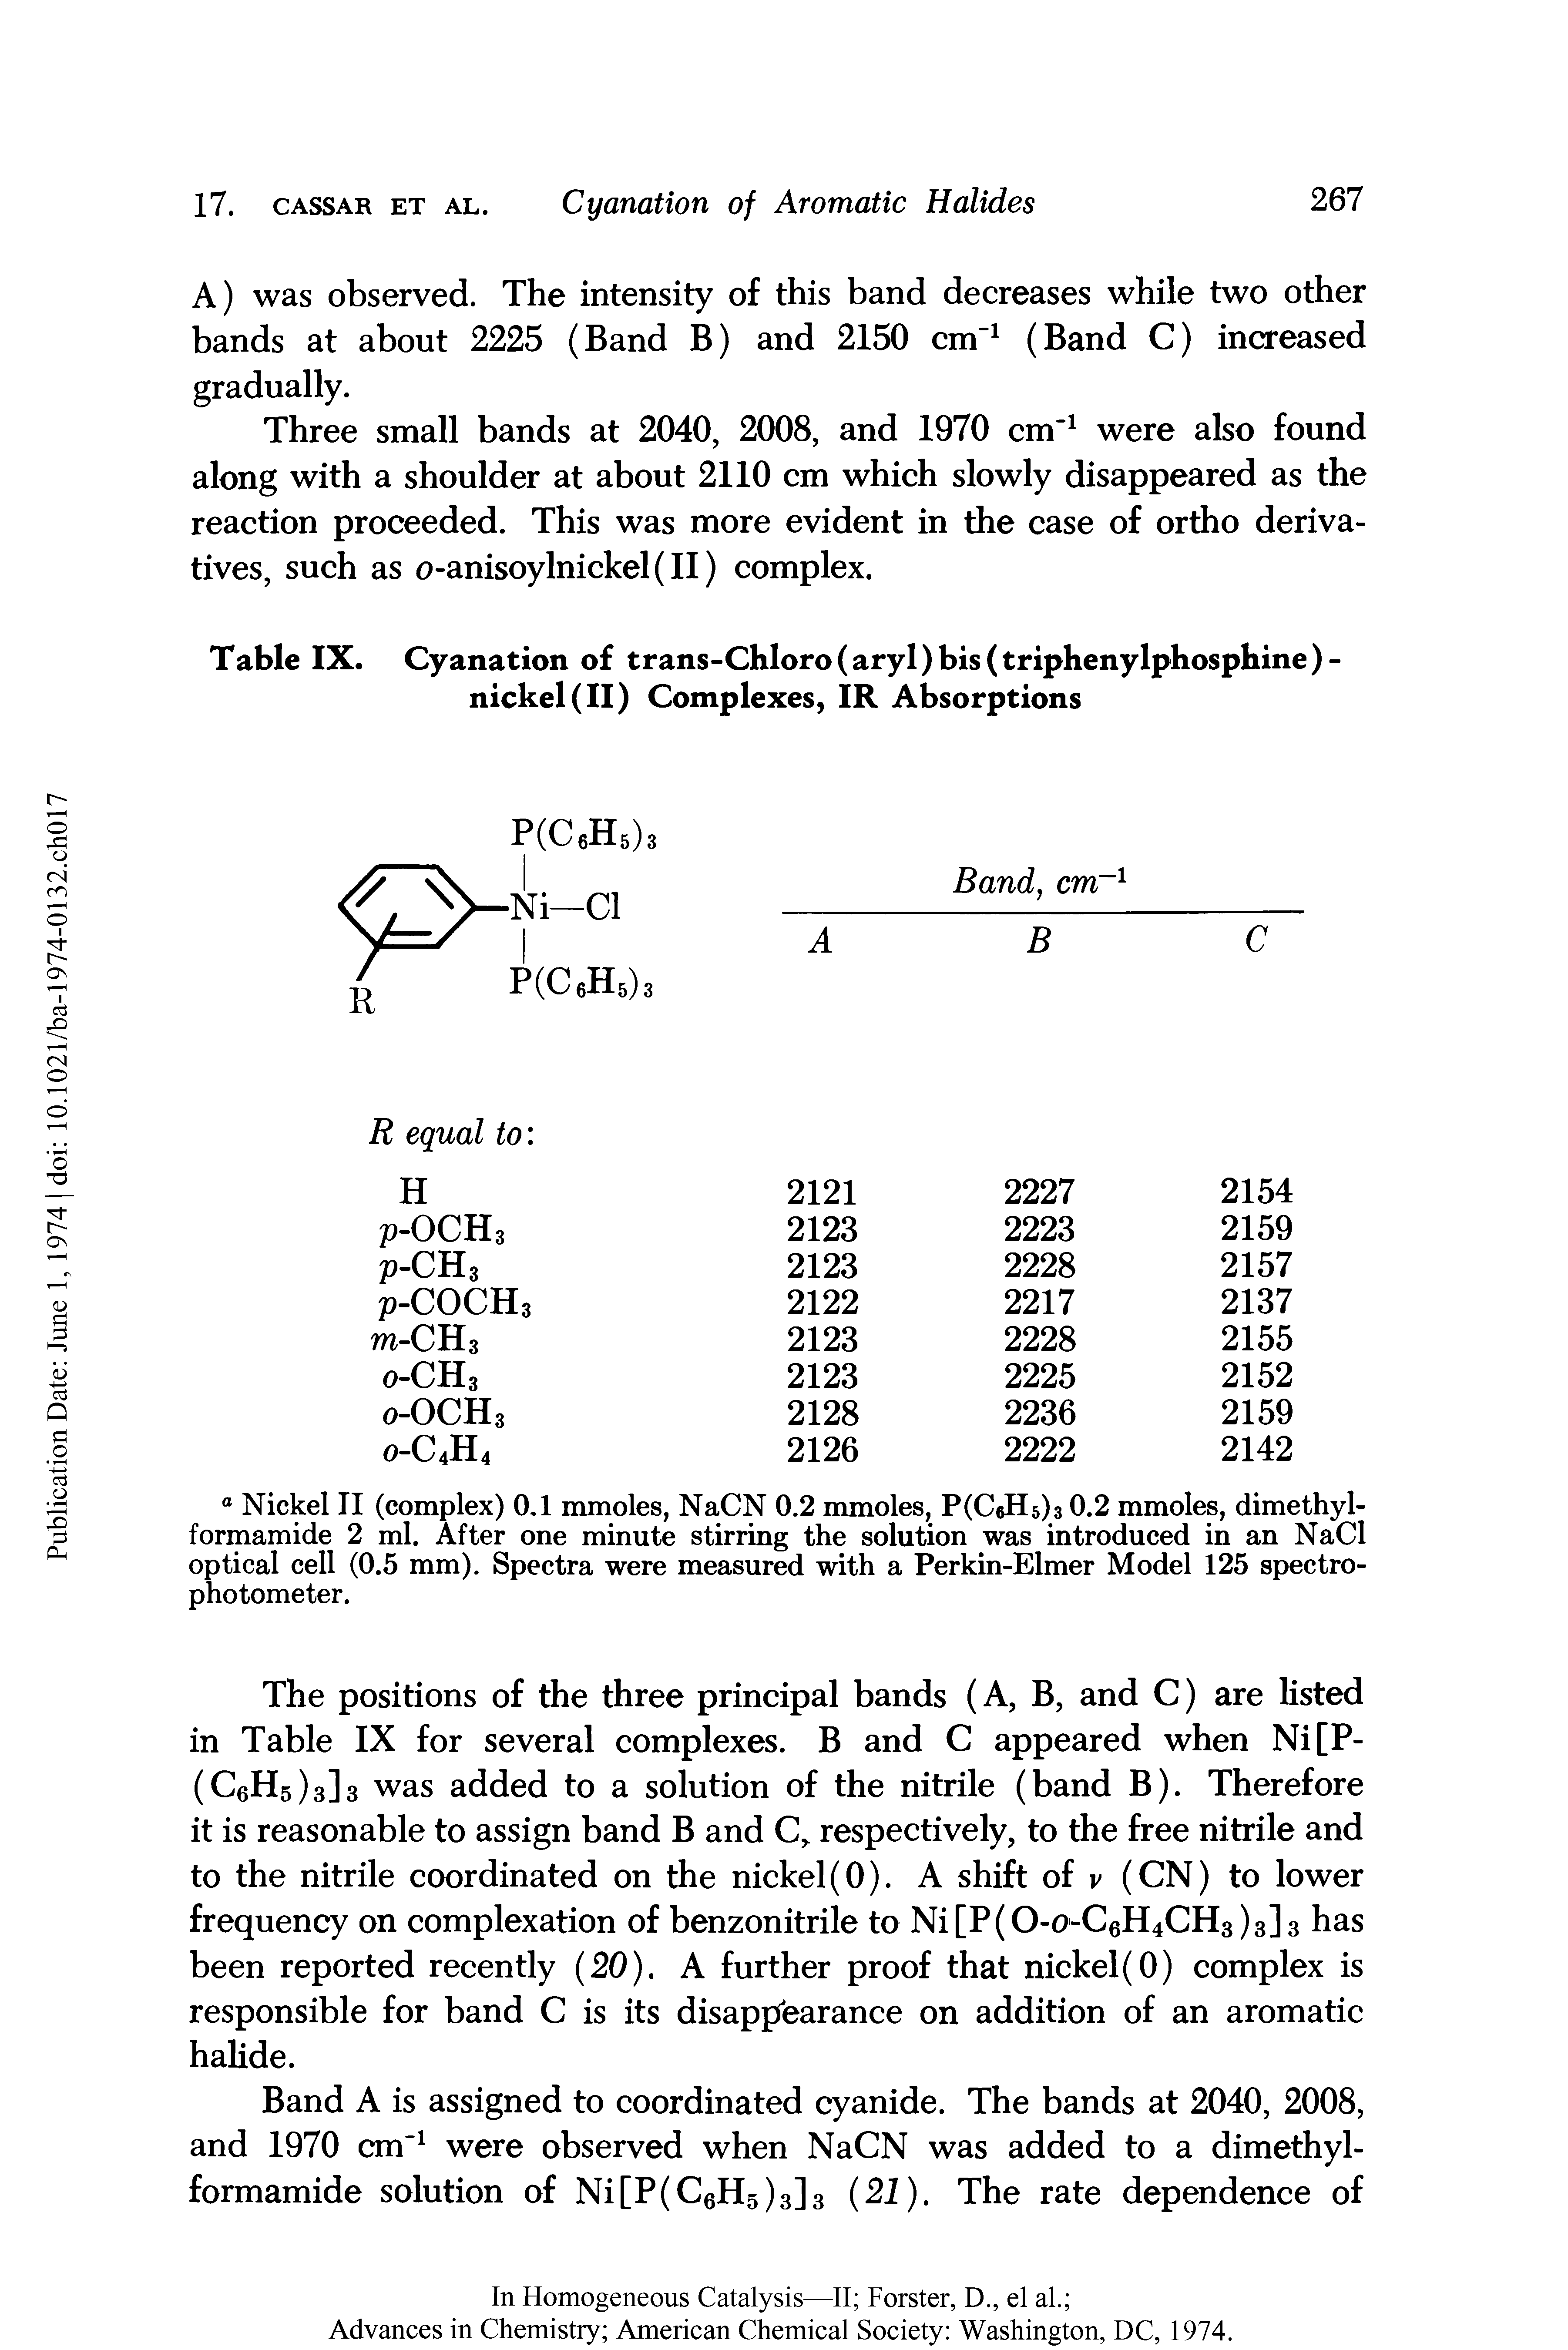 Table IX. Cyanation of trans-Chloro(aryl)bis(triphenylphosphine)-nickel(II) Complexes, IR Absorptions...